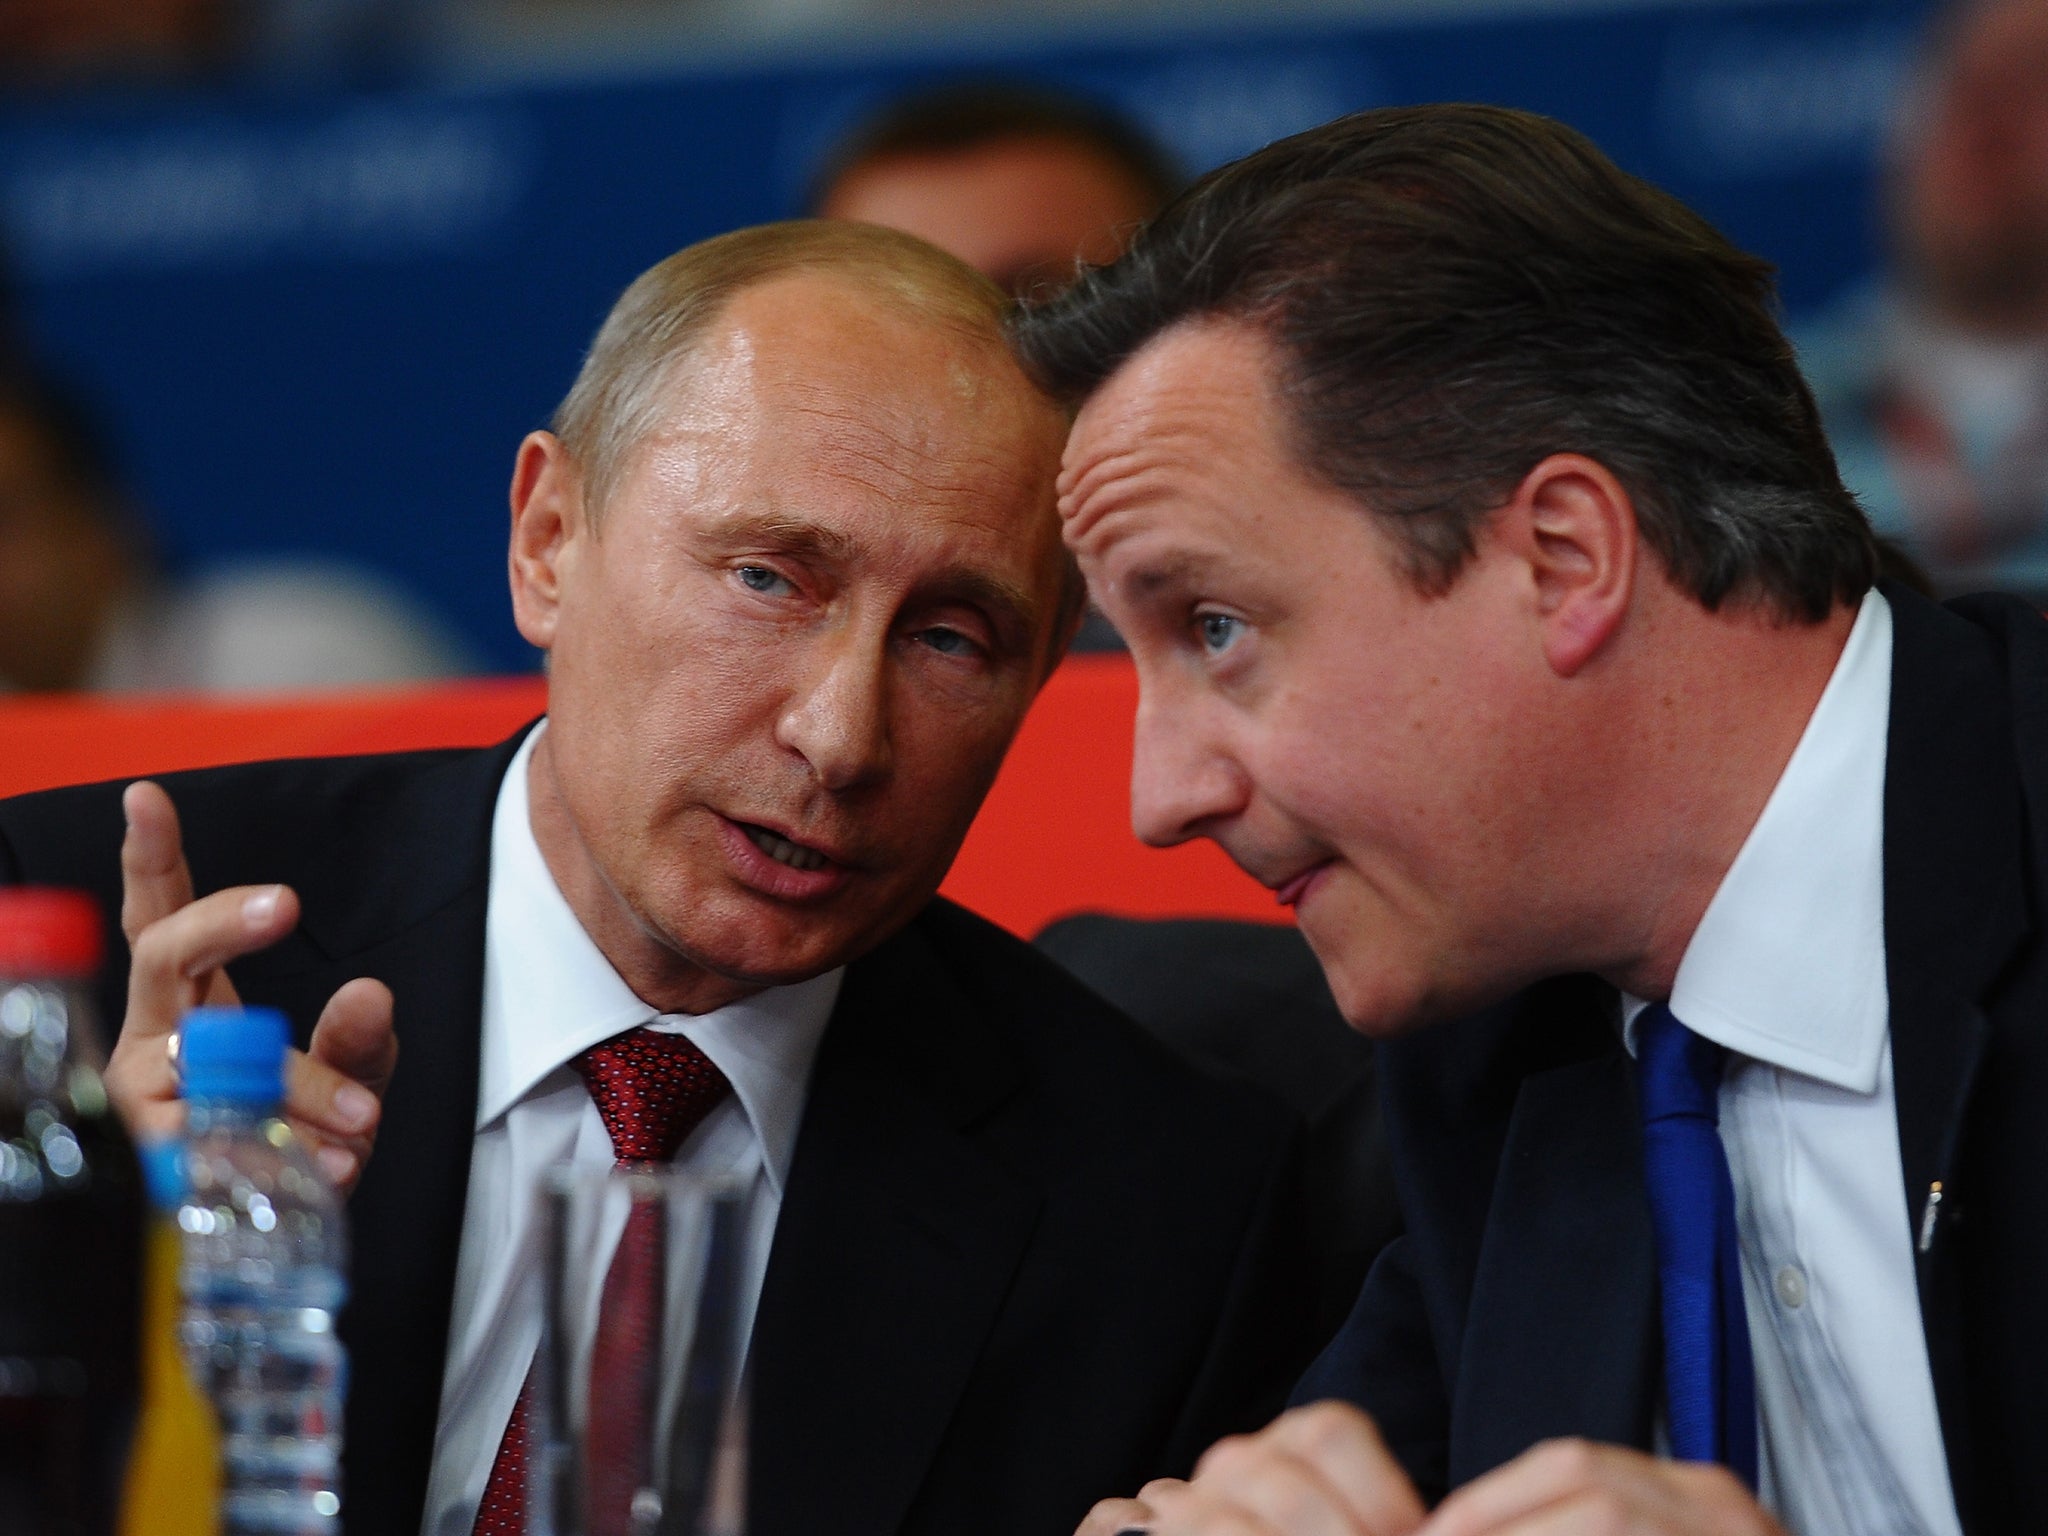 Vladimir Putin watching Judo with David Cameron on Day 6 of the London Olympic Games in 2012